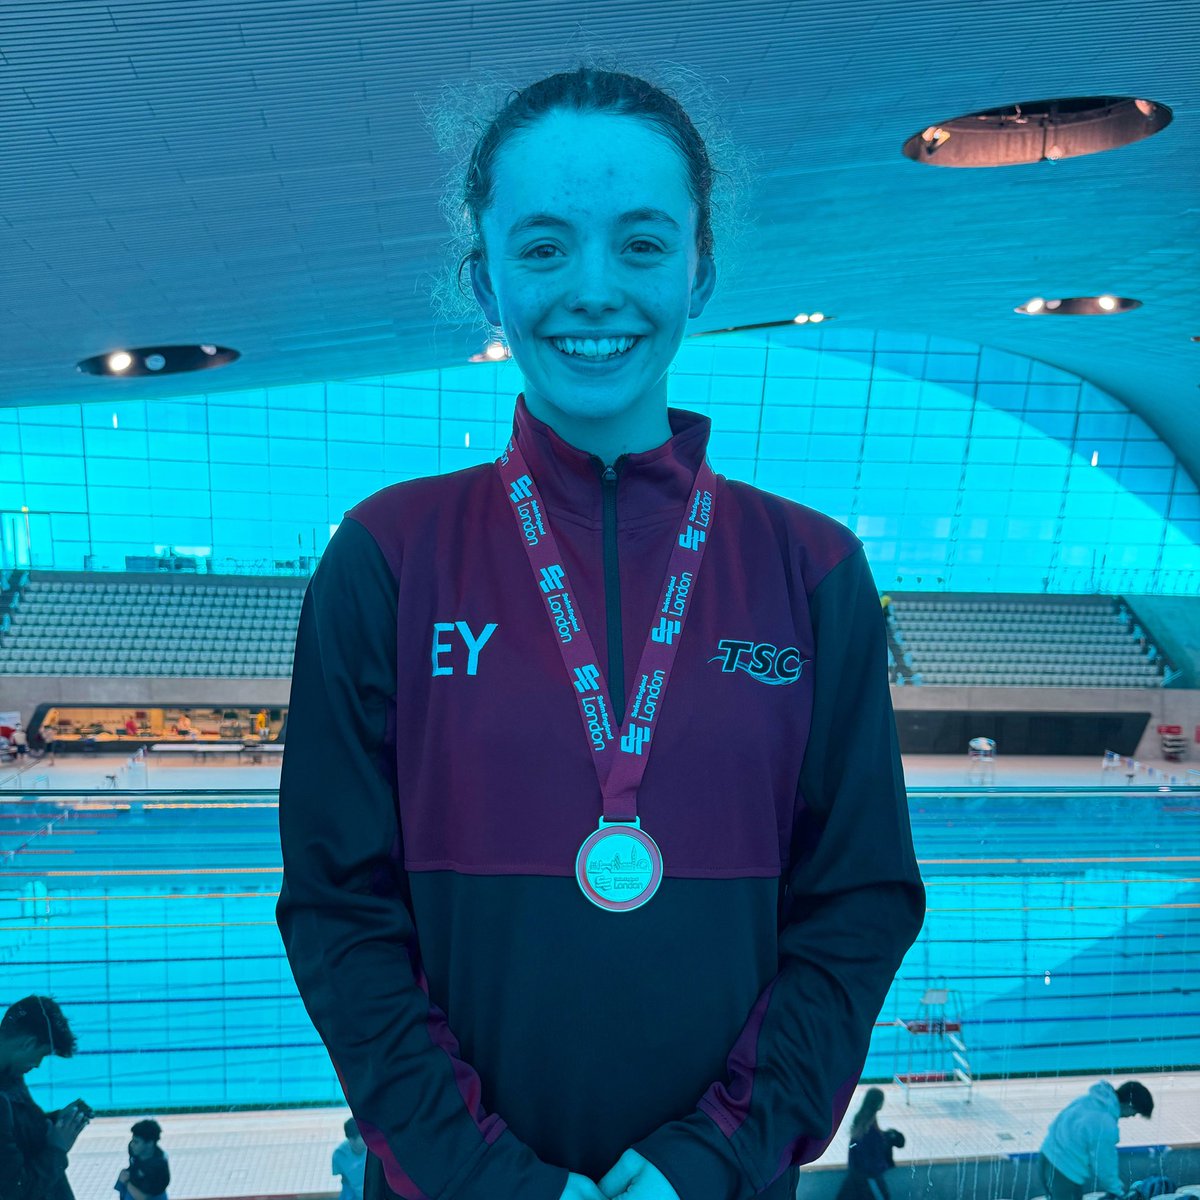 Well done to Evie, the new 200 Fly Regional Champion 🥇

A fantastic race, in a stellar time to take her first ever Regional title 👏🏻